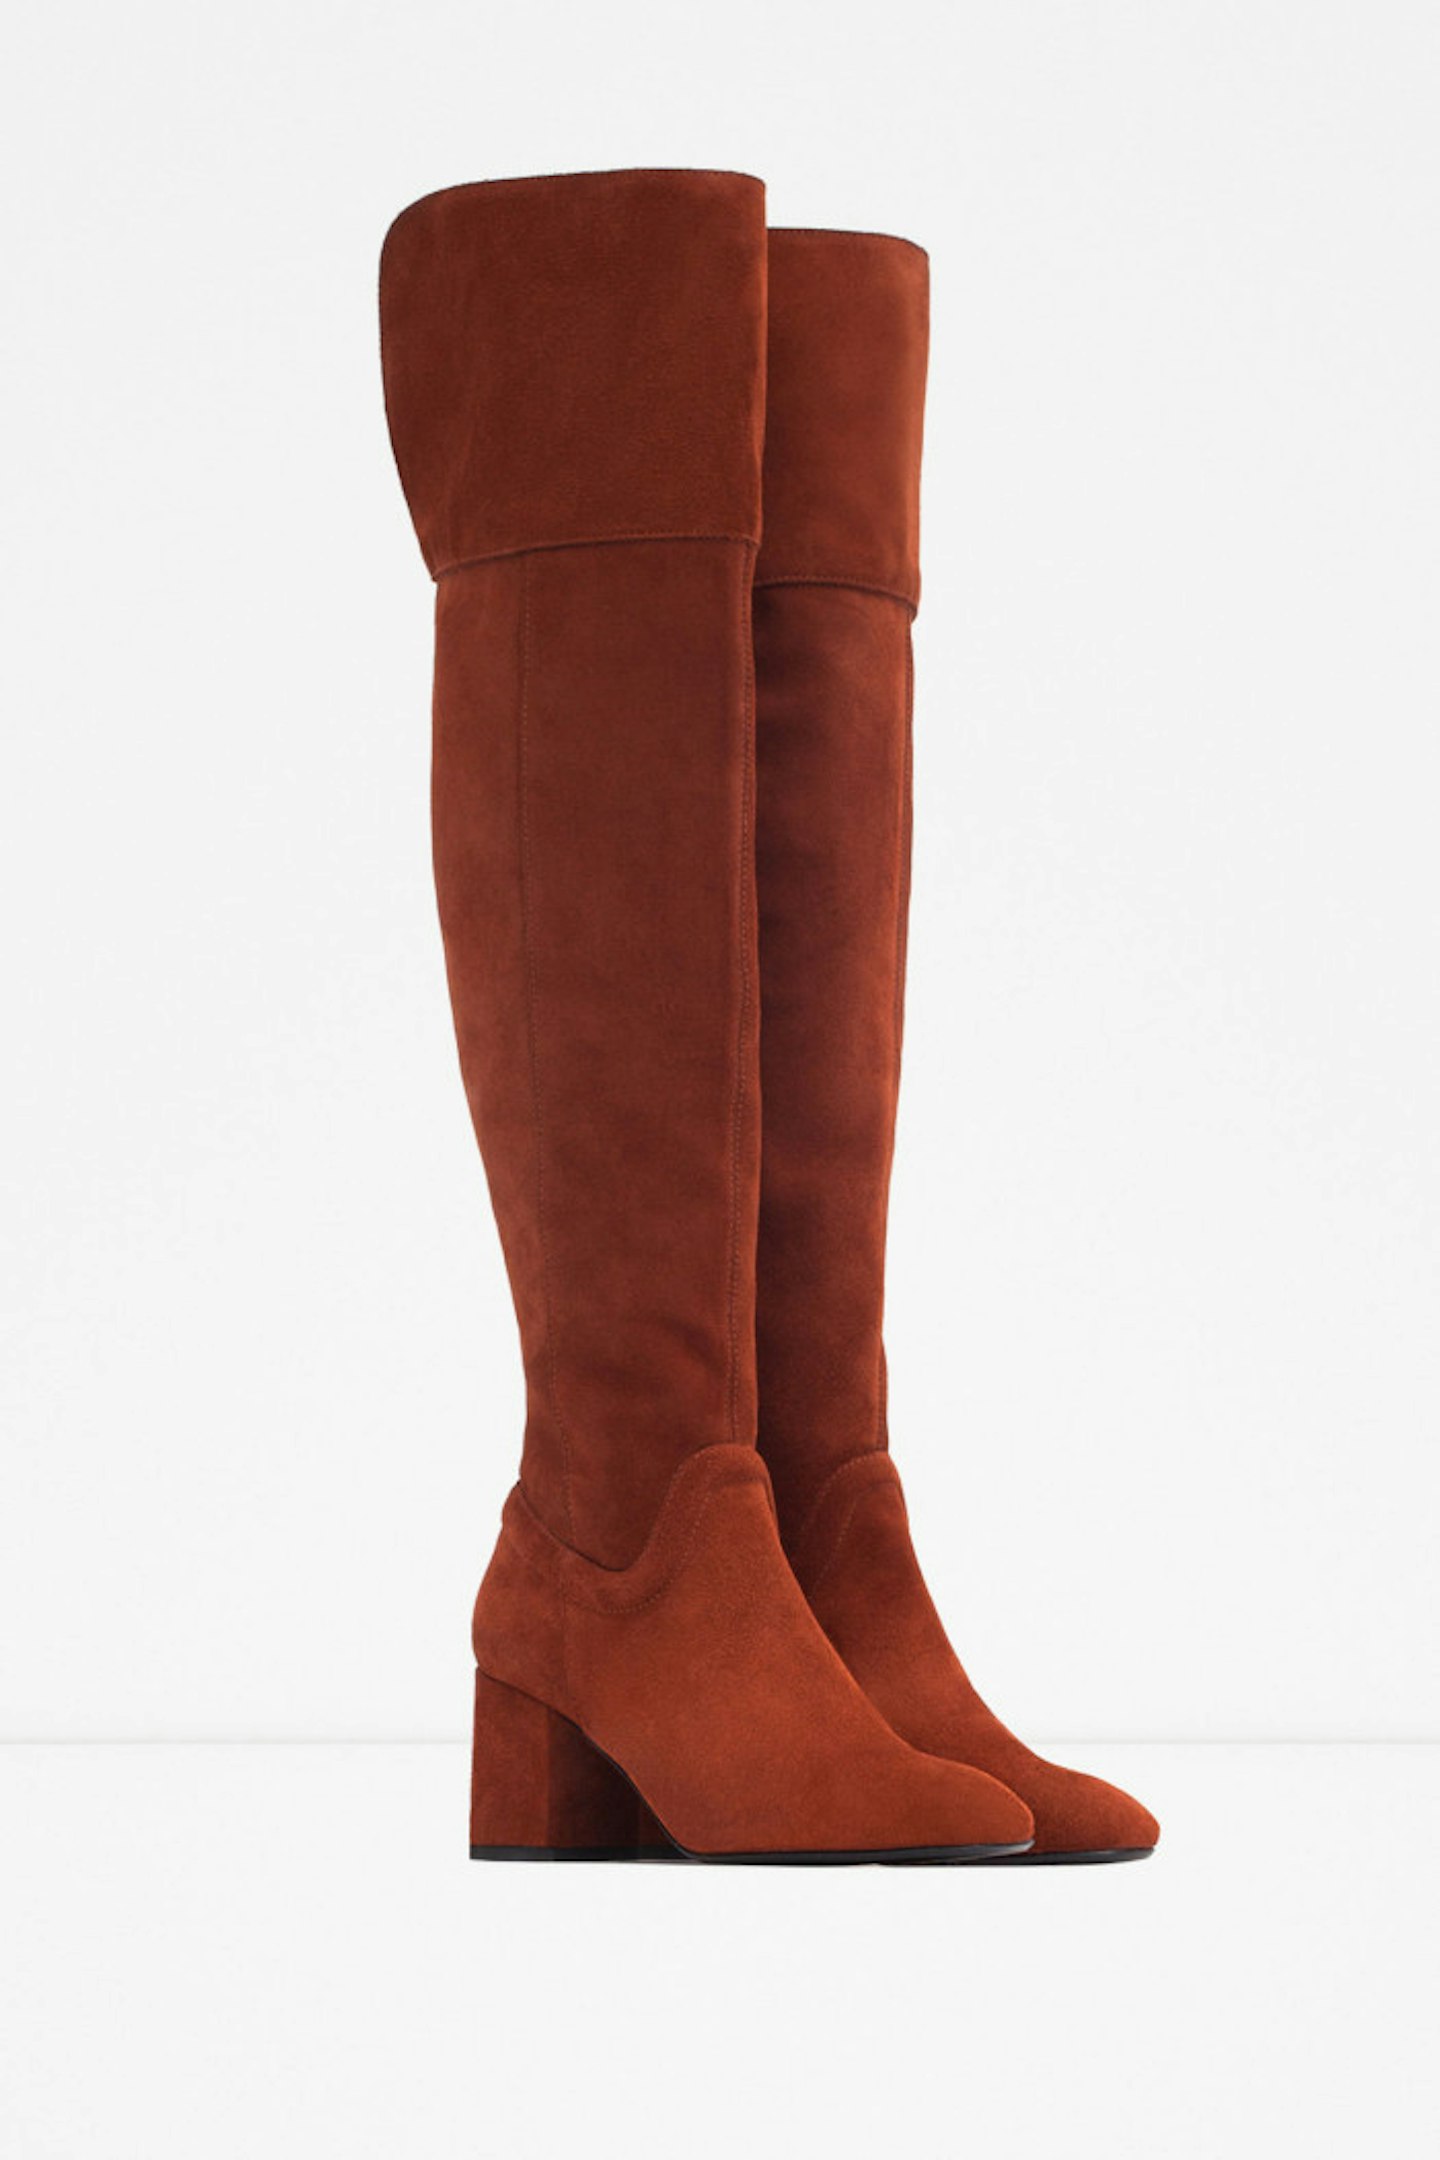 These suede beauties are a must-have for the more bohemian amongst you.